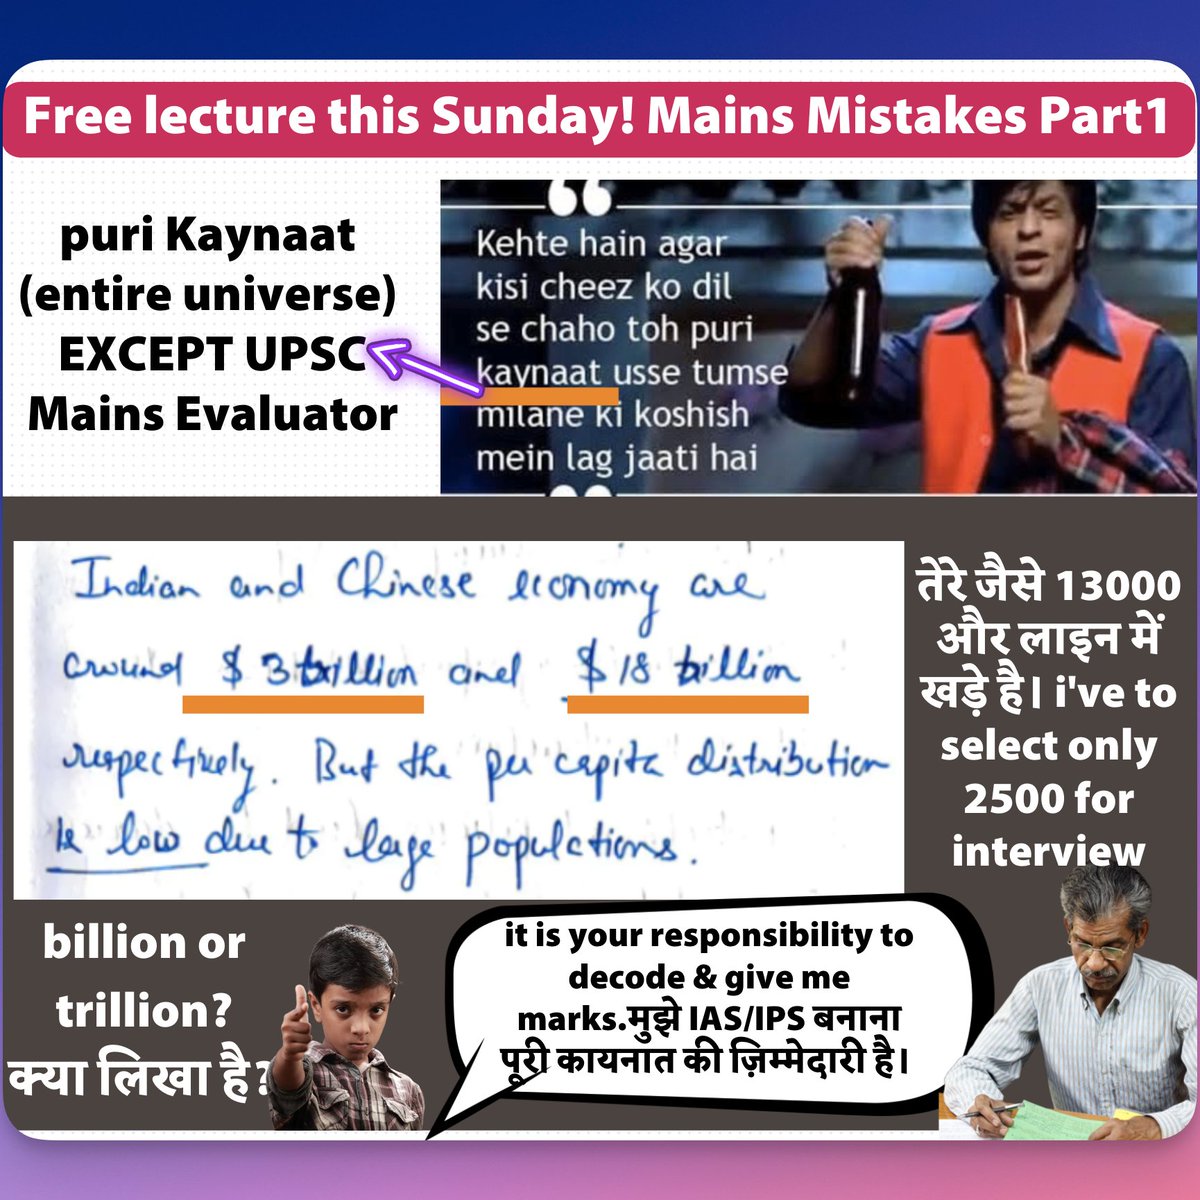 😒 I don't understand why some #UPSC Mains aspirants think of themselves as SRK. 

 🧑🏻‍🏫 Mrunal's Free Special Class on Mains Mistakes Part1 - unacademy.com/class/mains-mi… (🔖unlock Code: 'Mrunal.org')

🗓️ Time:  Sunday Morning